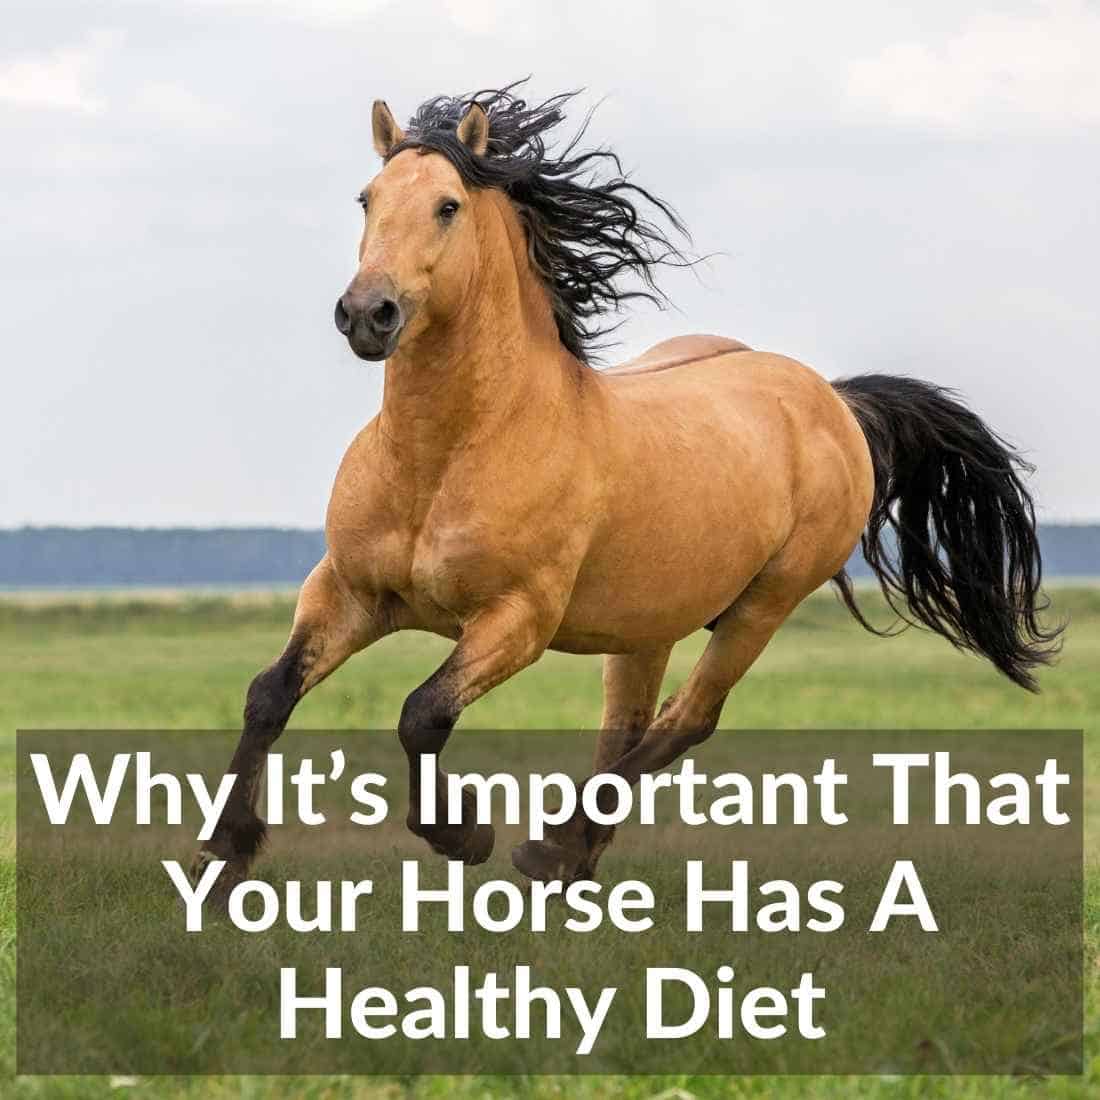 Why Its Important That Your Horse Has A Healthy Diet